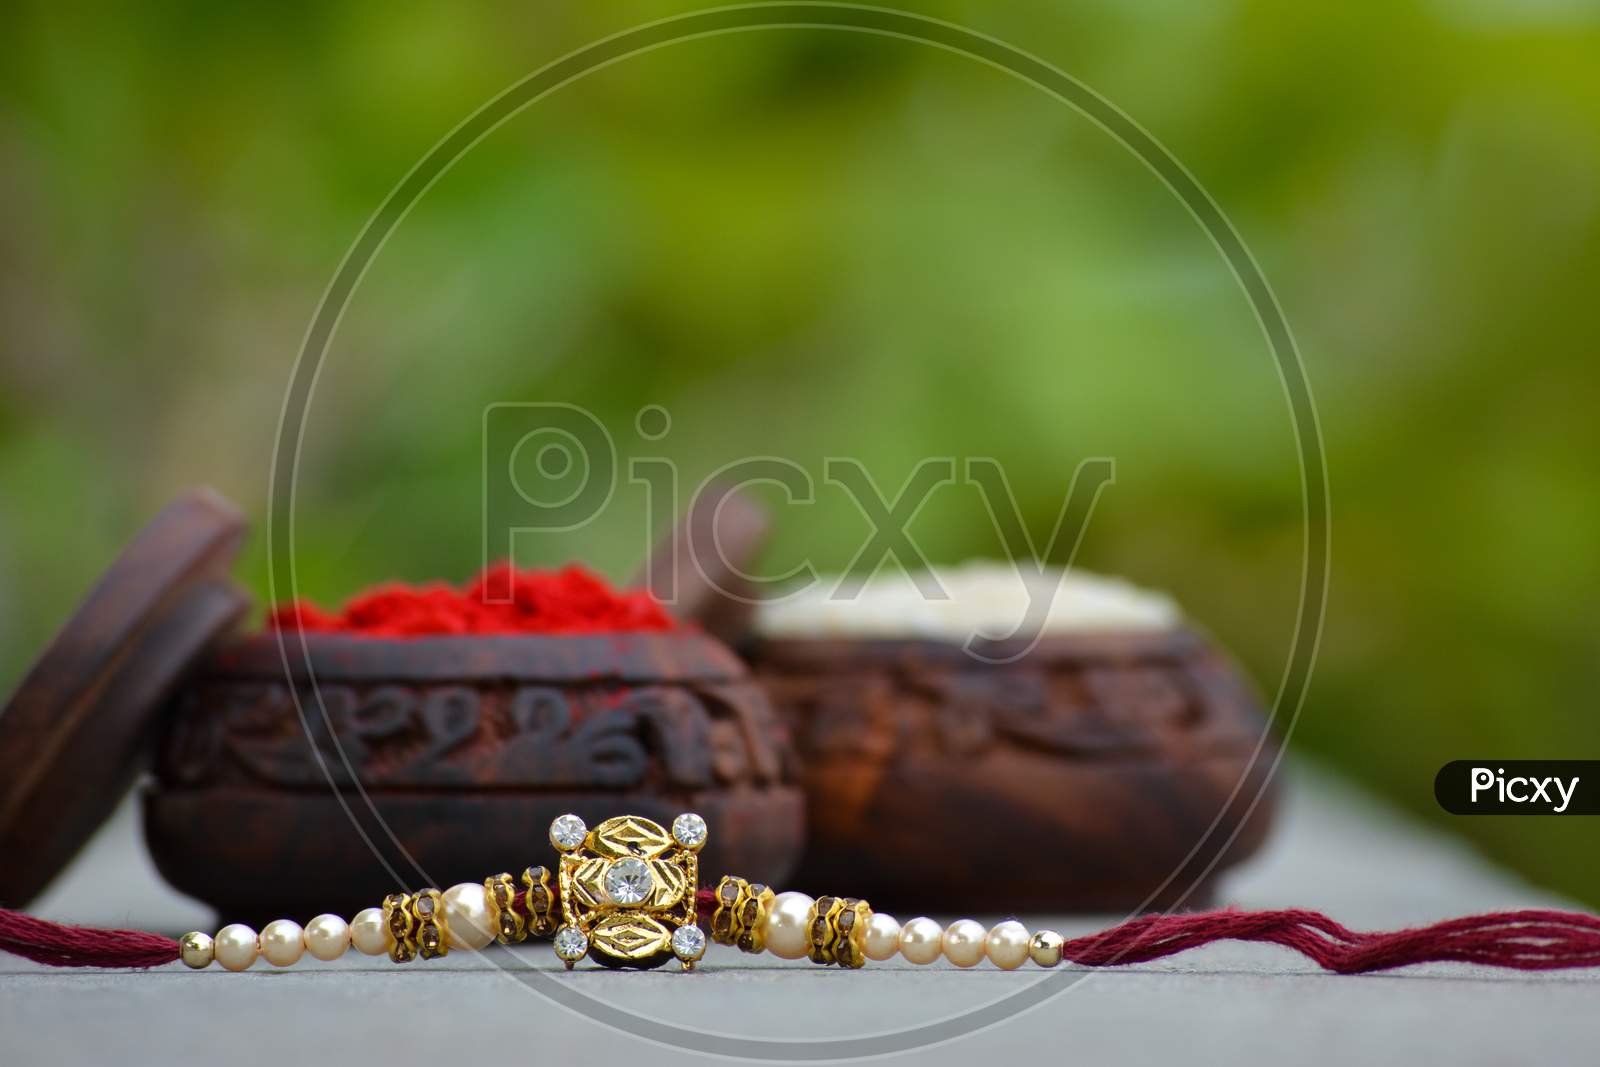 Raksha bandhan rakhi with rice grains and kumkum. A traditional indian wrist band which is a symbol of love between Brothers and Sisters